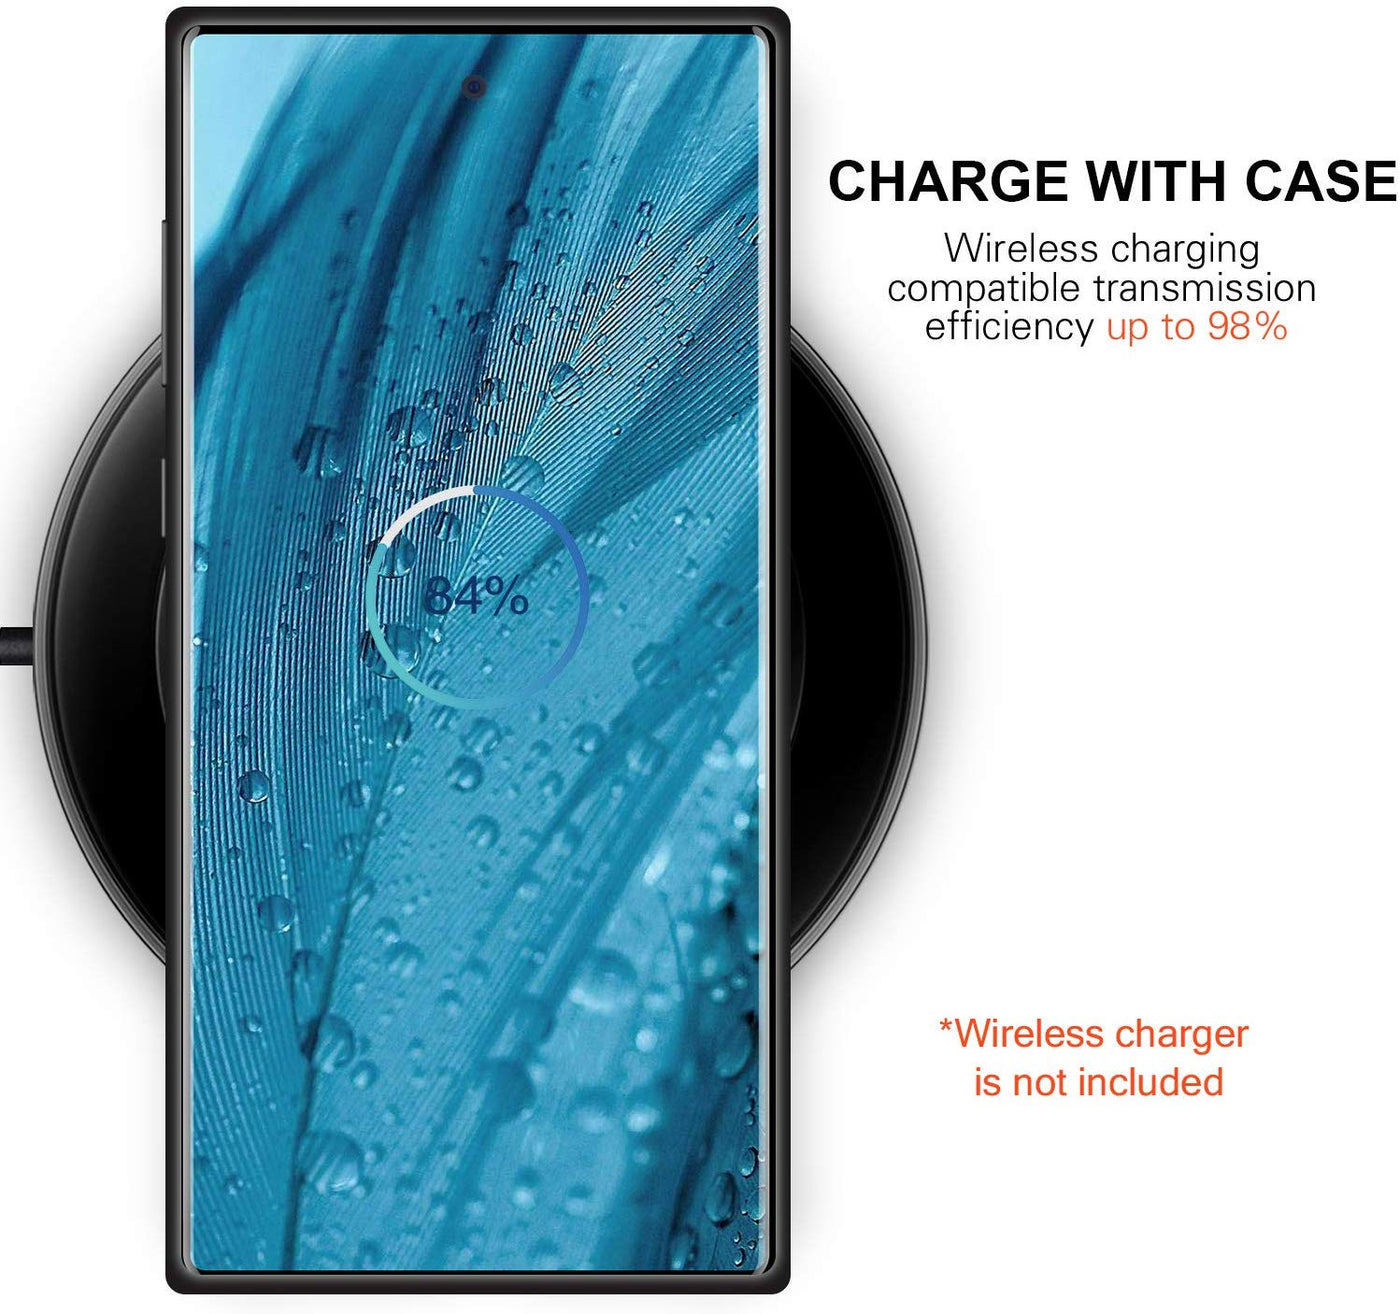 Samsung Galaxy Note 10 Plus back case cover with wireless charging